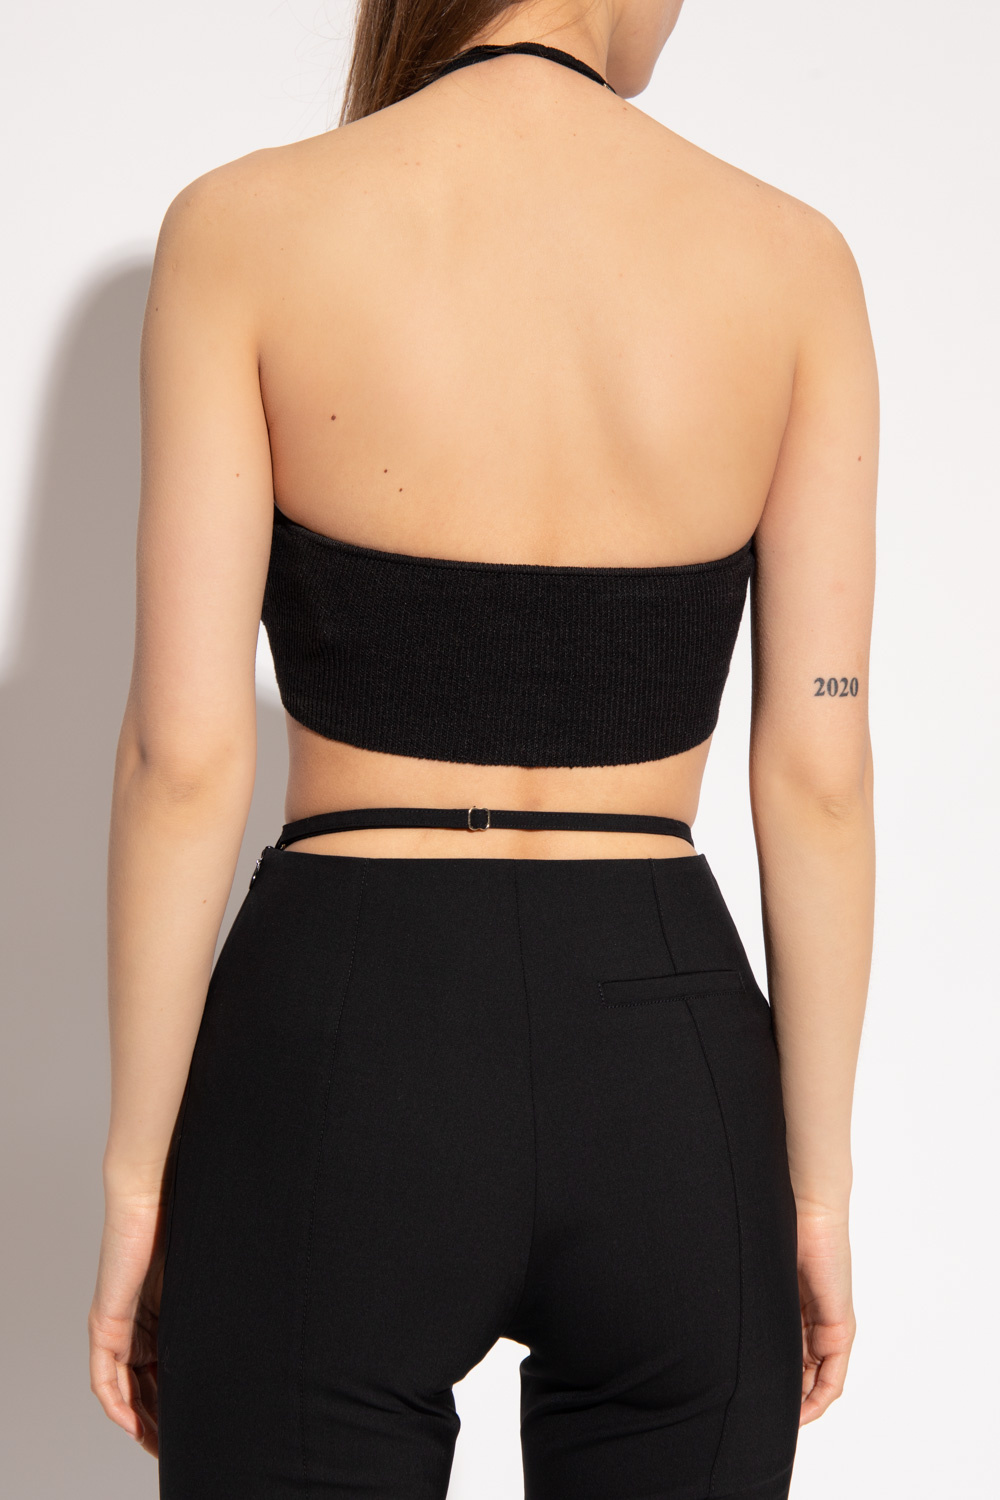 Jacquemus ‘Beijo’ cropped top